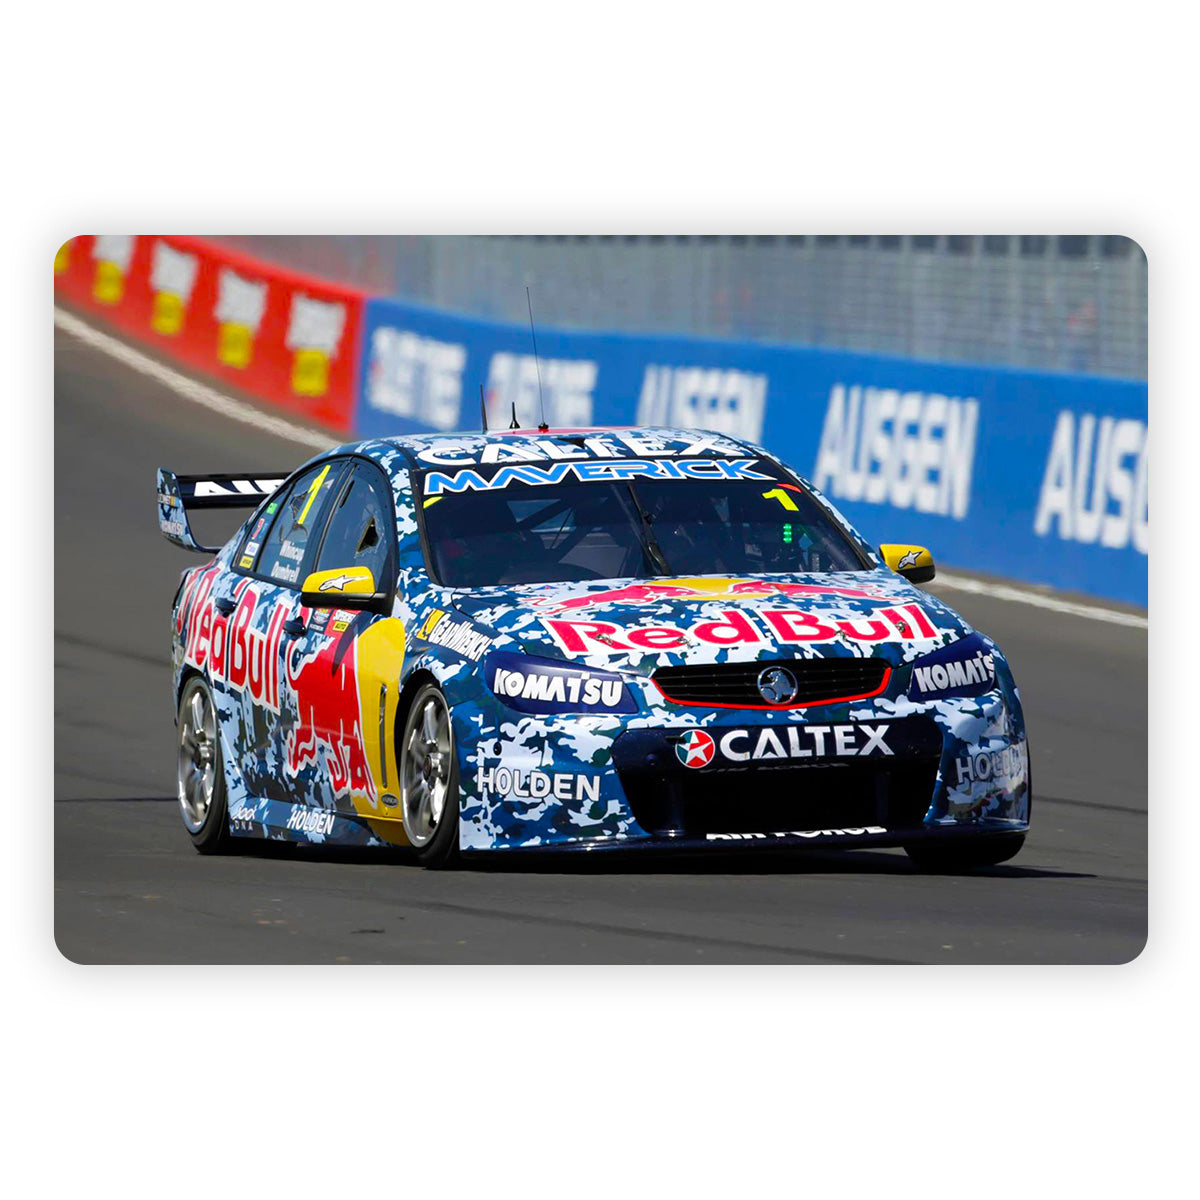 Holden VF Commodore - Red Bull Racing #1 - Whincup/Dumbrell - 2014 Bathurst 1000 Air Force Livery